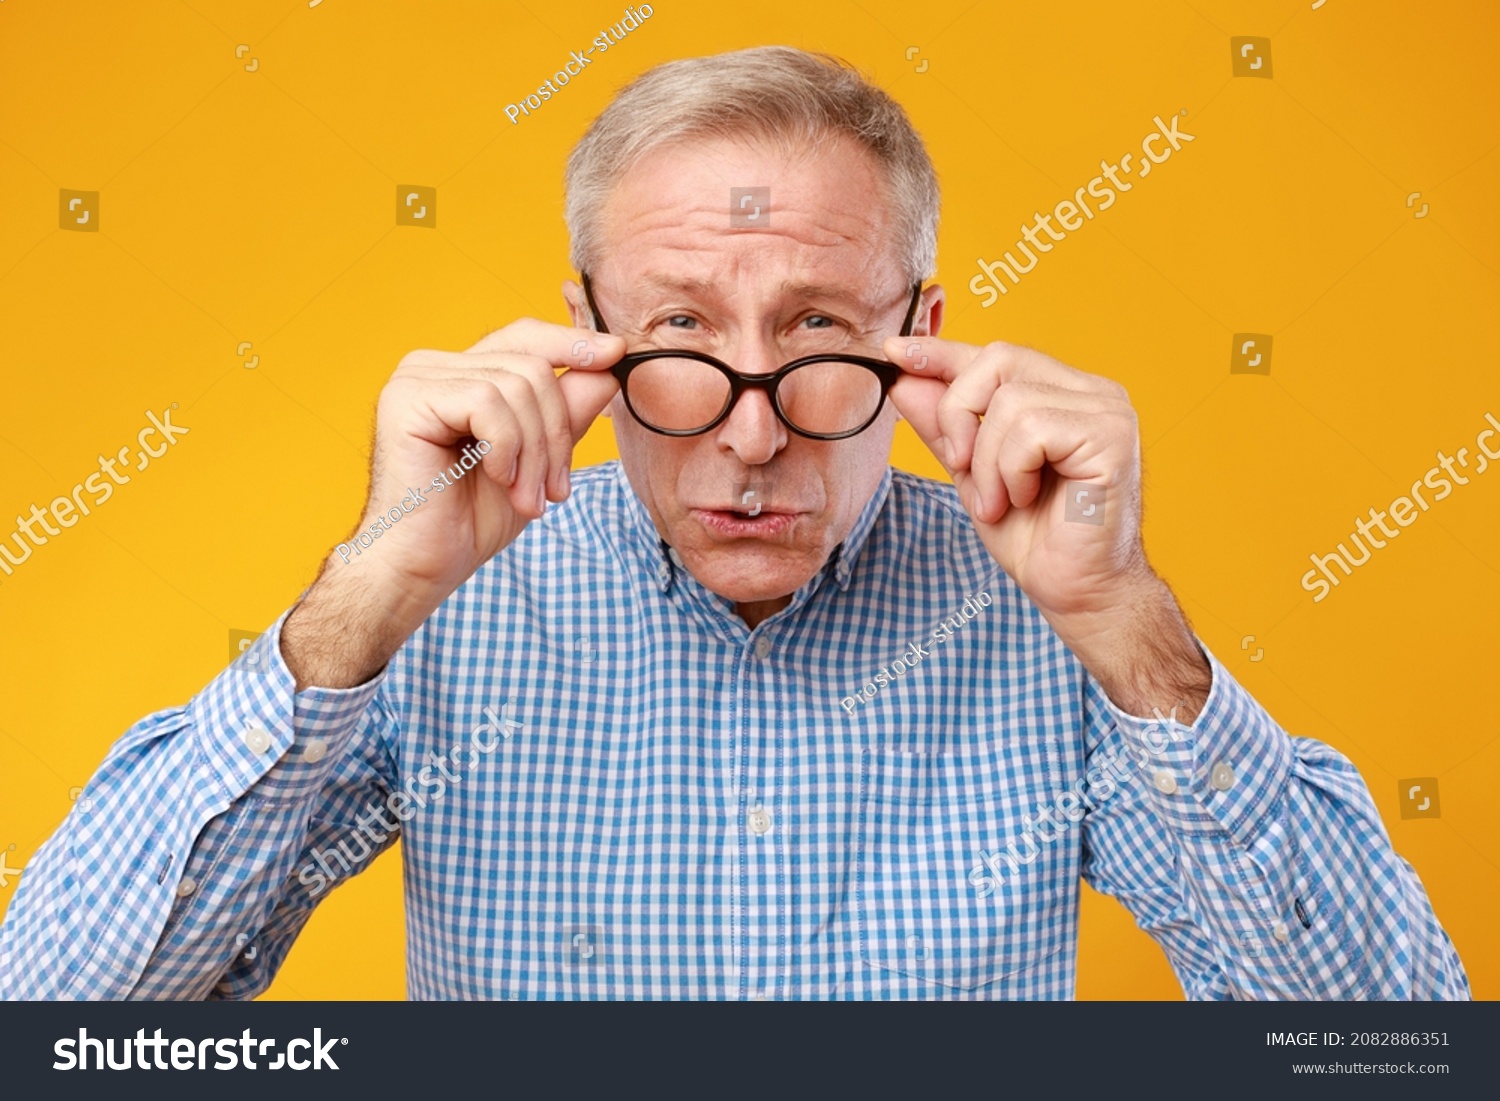 Poor Eyesight. Senior Man Can't See, Squinting Eyes Wearing Eyeglasses Having Problems With Vision, Looking At Camera, Yellow Orange Wall. Ophtalmic Issue In Older Age, Macular Degeneration Concept #2082886351